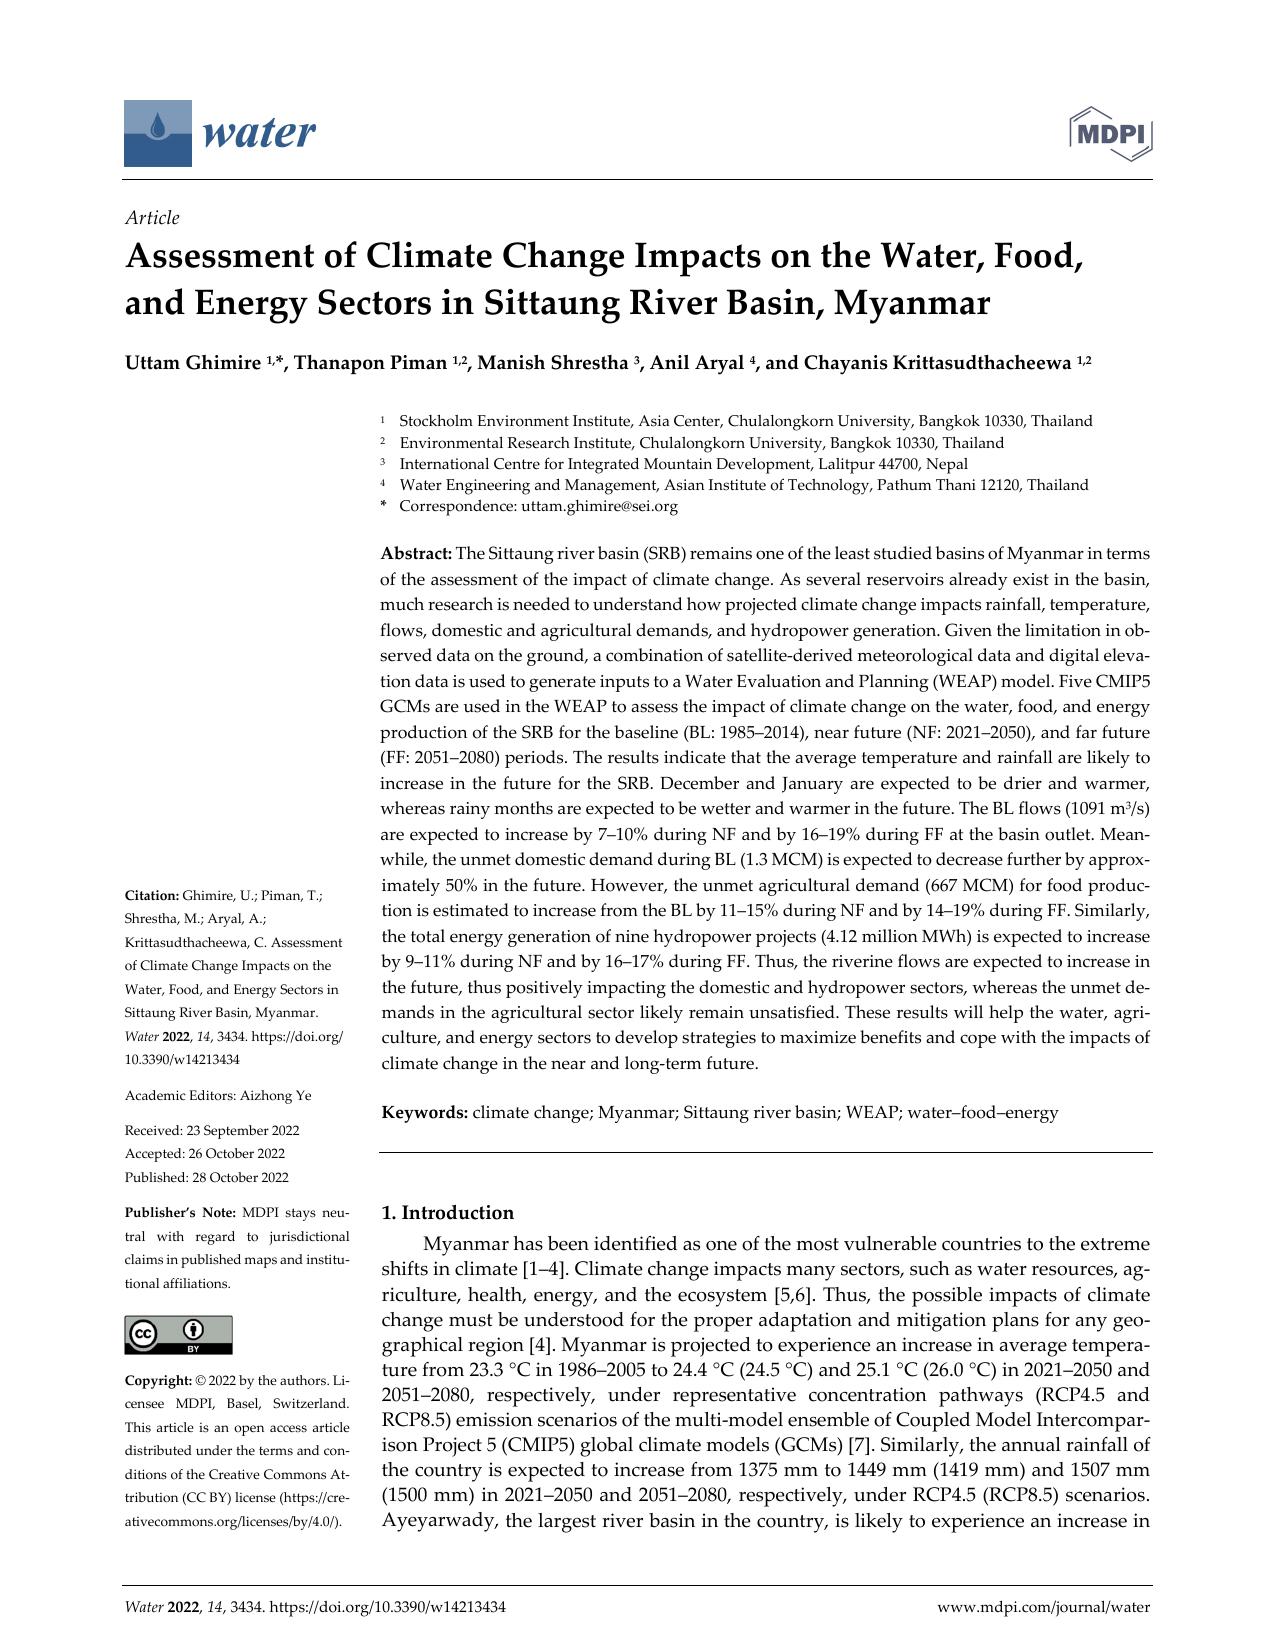 Assessment of climate change Impacts on the water, food, and energy sectors in Sittaung River Basin, Myanmar